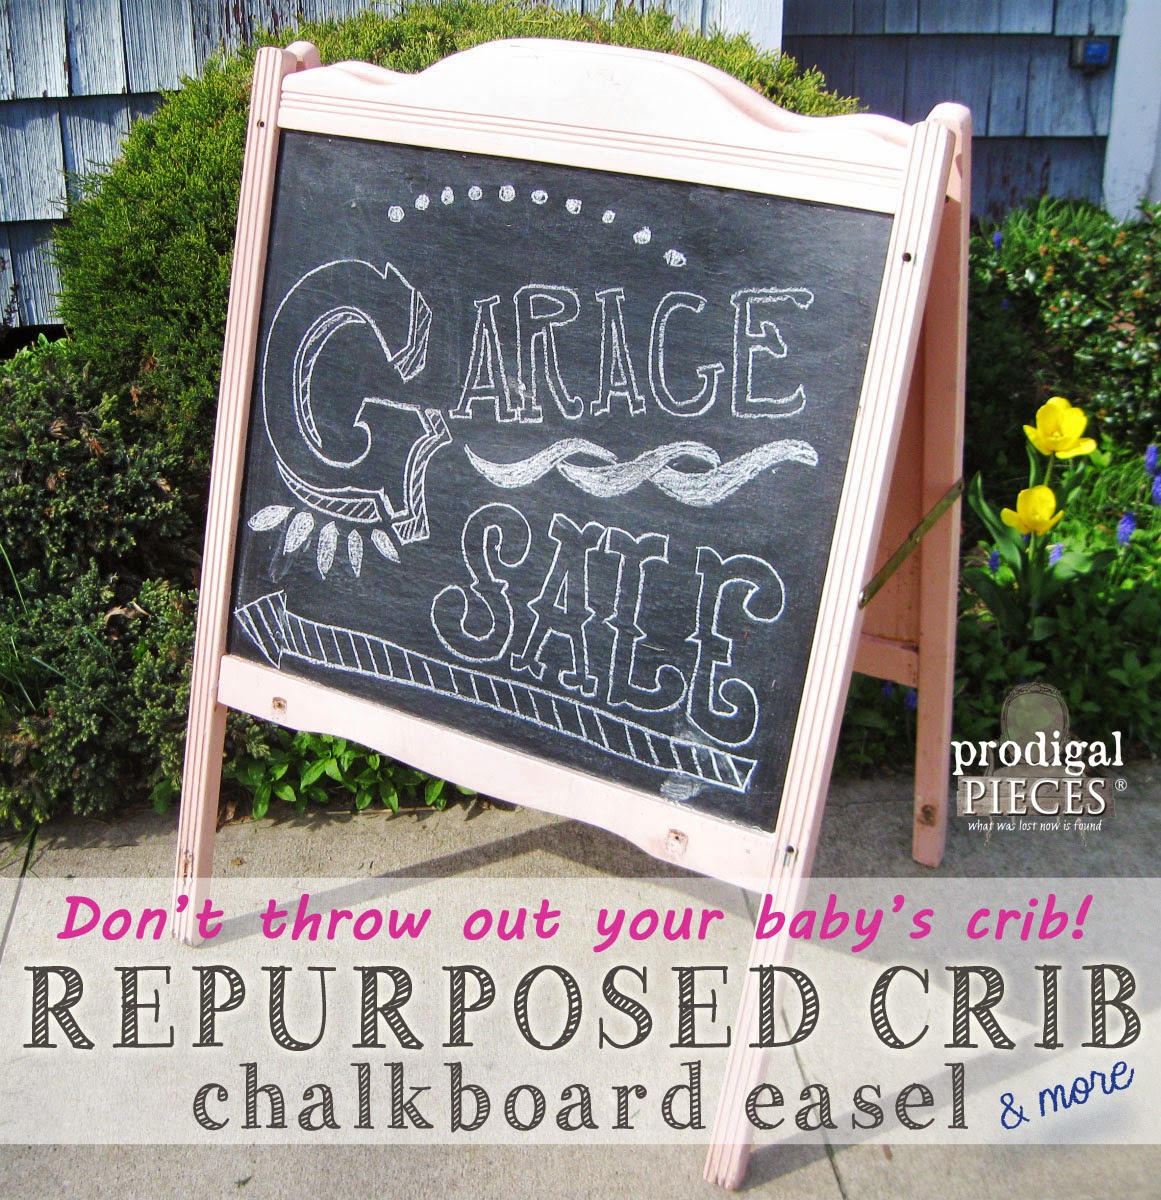 Don't Throw Out Your Baby's Crib! Repurpose It For Garden, Storage, or a Chalkboard Easel by Prodigal Pieces www.prodigalpieces.com #prodigalpieces